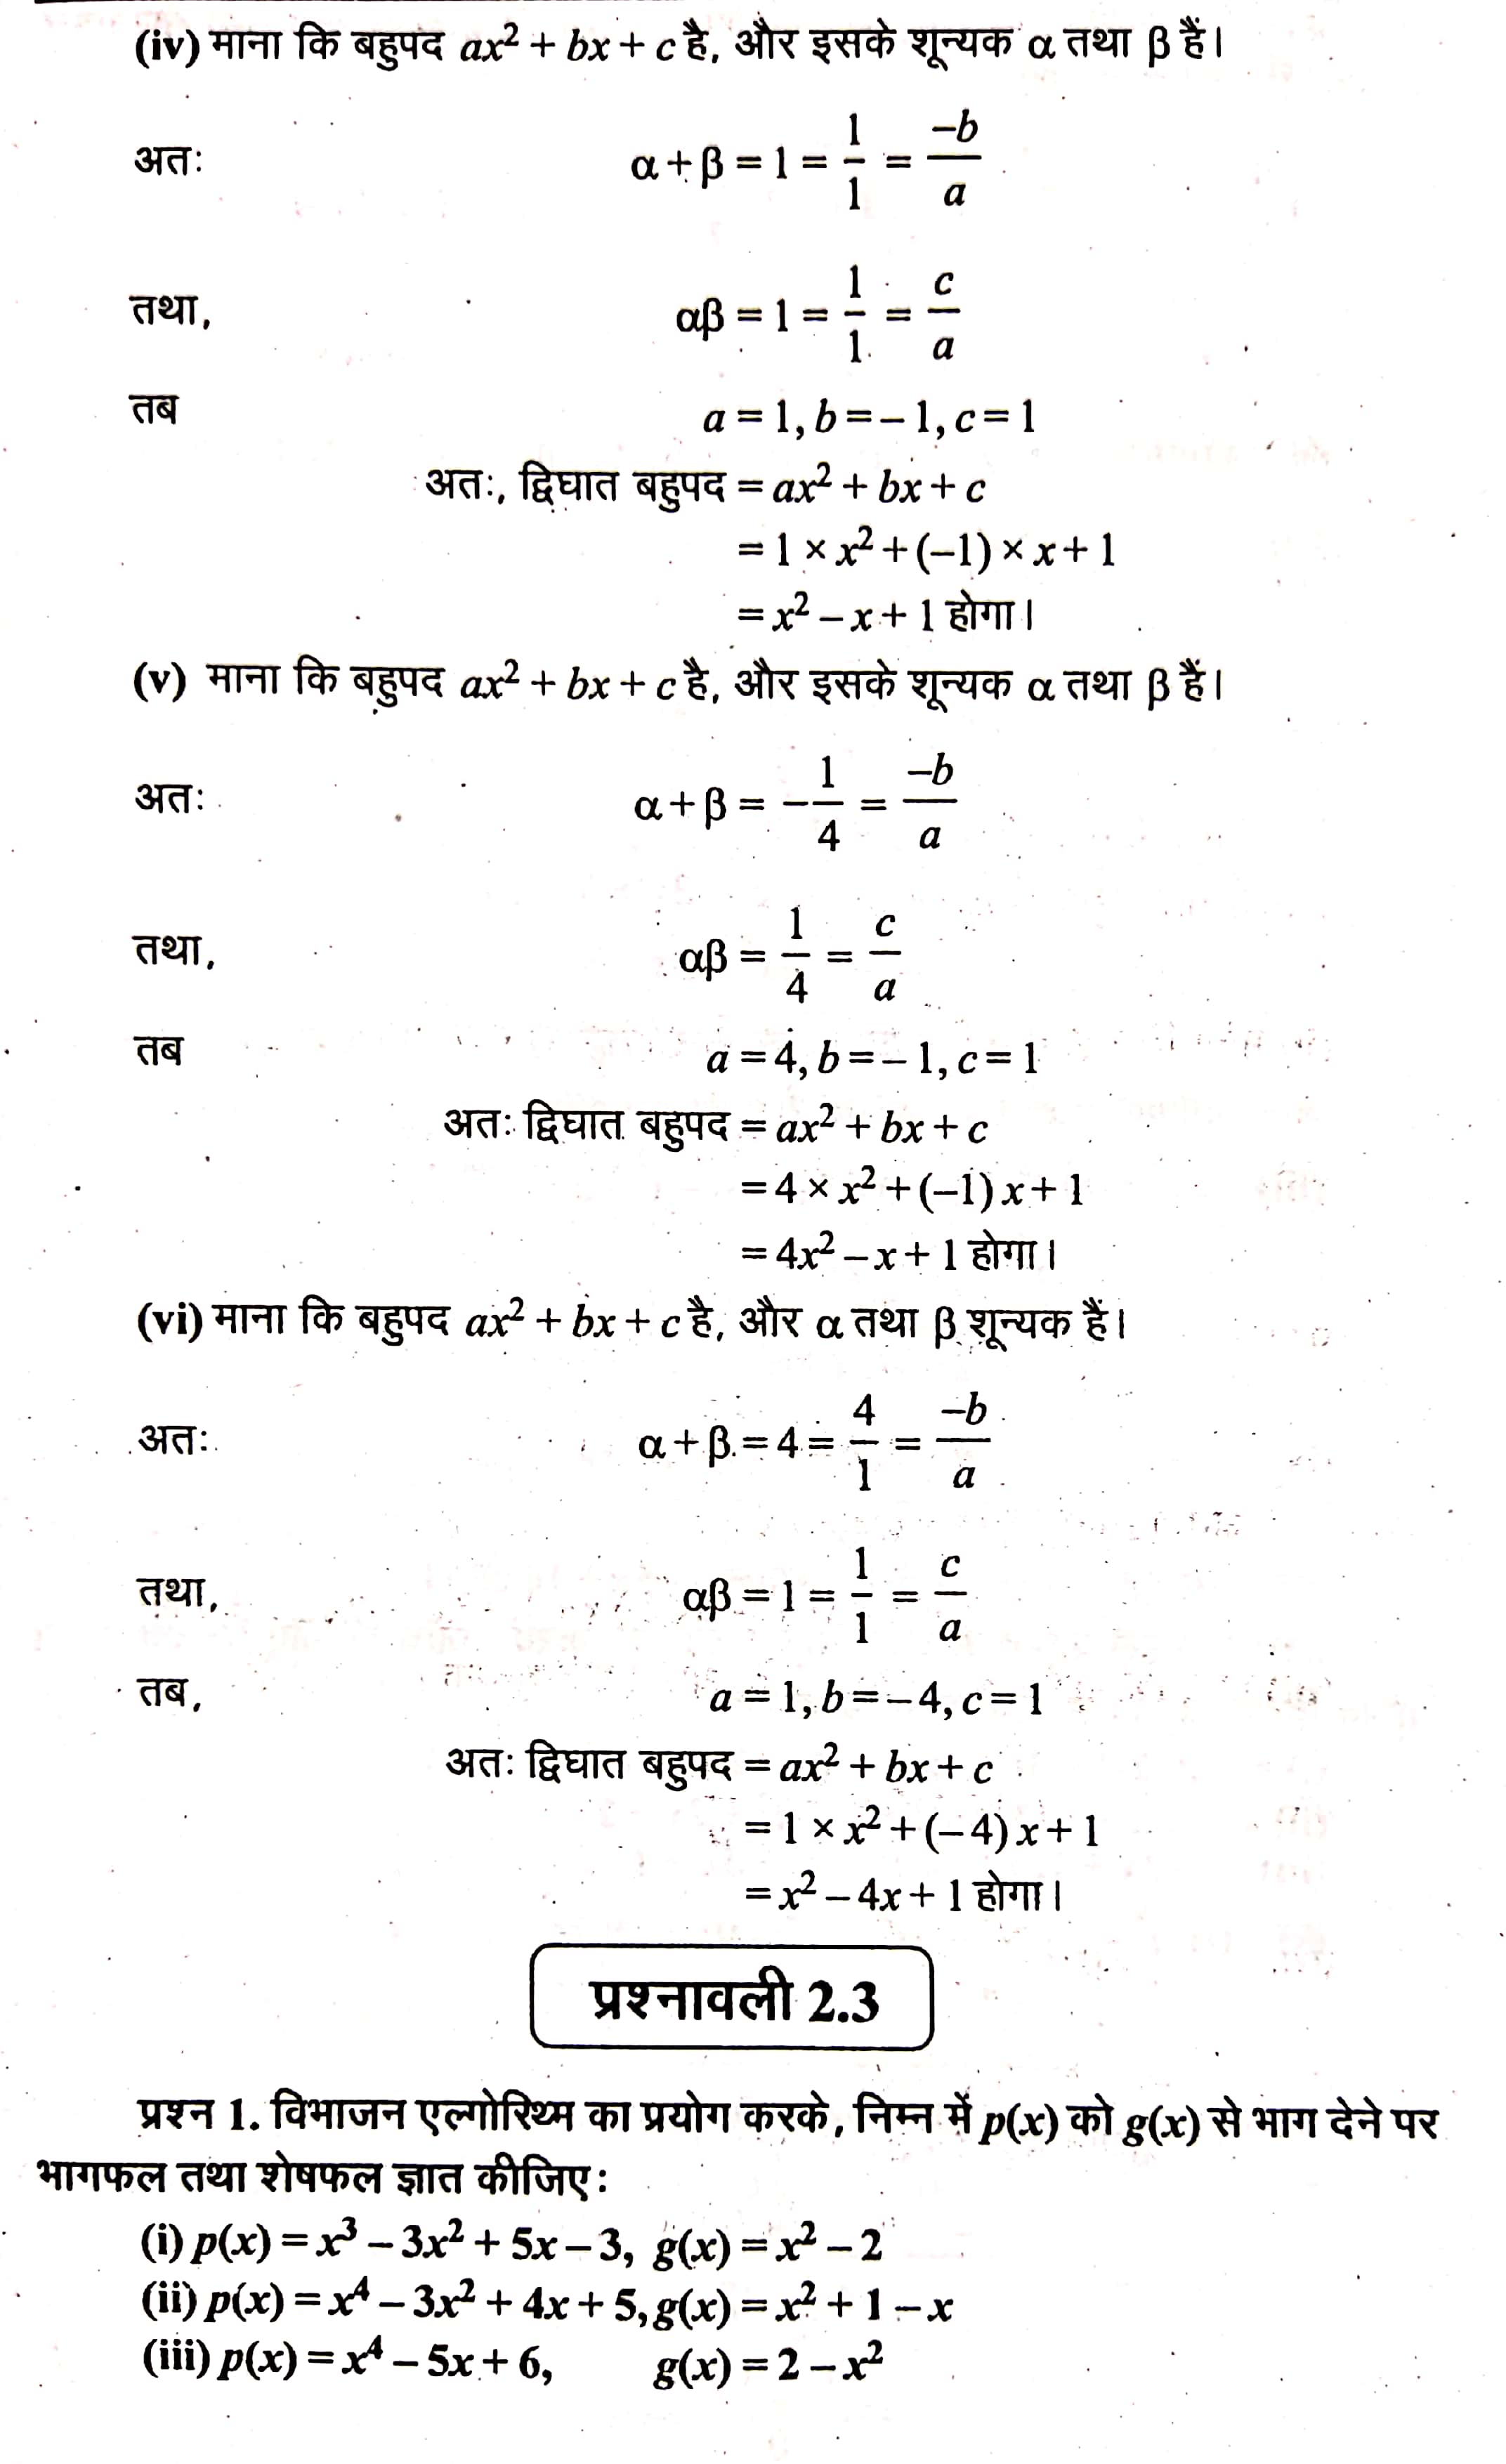 10th class math solution pdf download